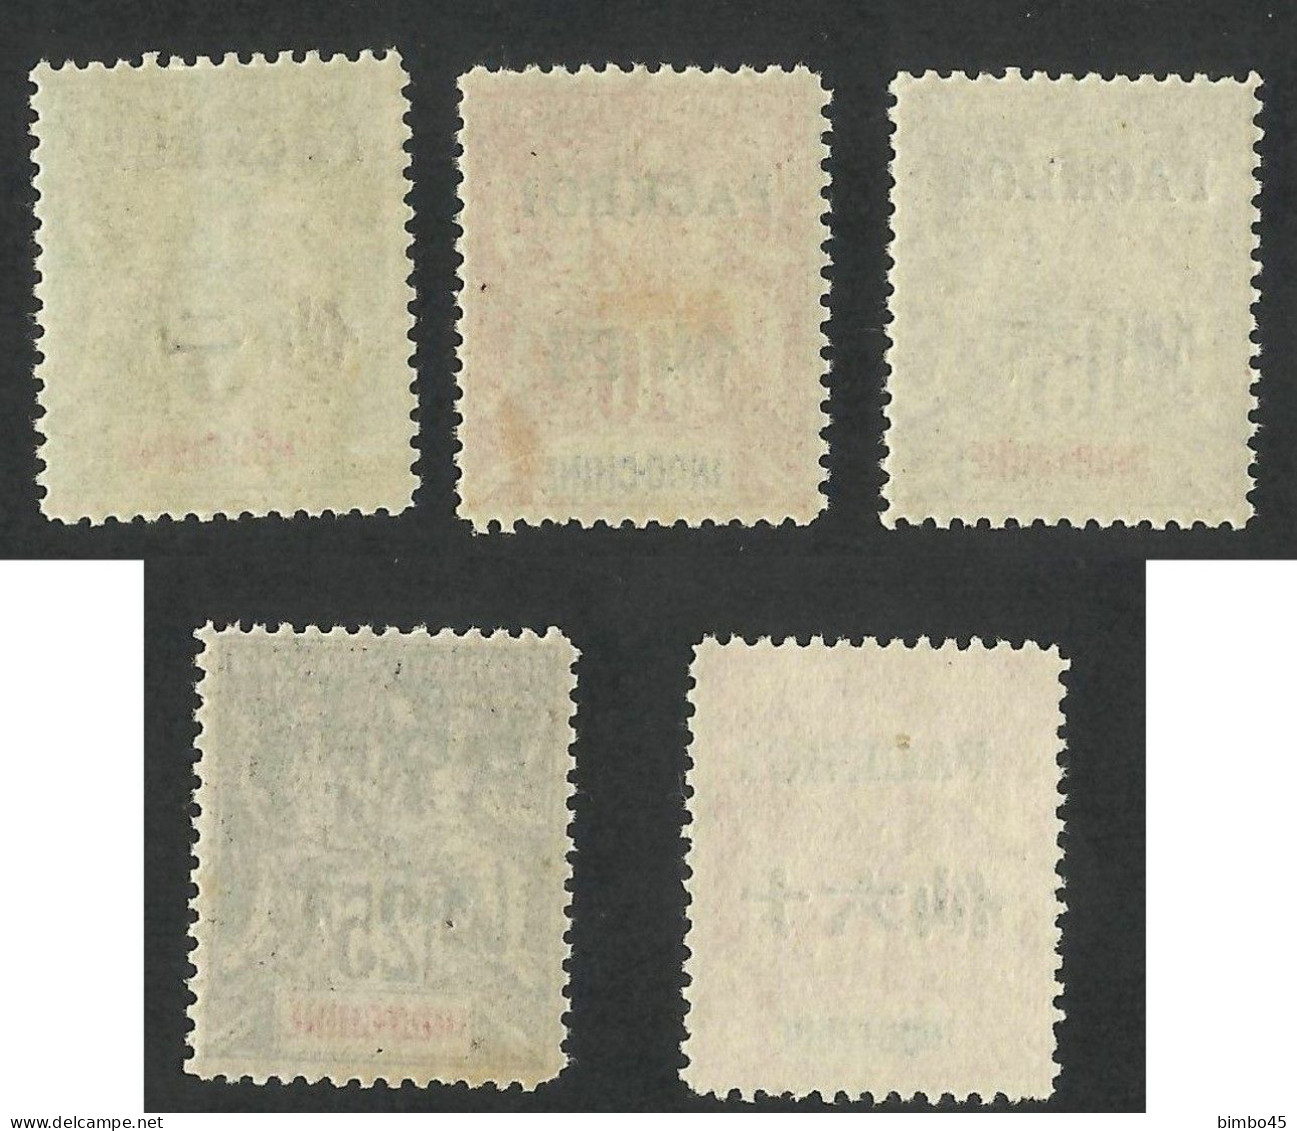 INDO-CHINE / FRENCH POST OFFICE IN PACKHOI /OVERPRINT ,,PACKHOI''-1902-1904 MNH & MLH - Forgery , Faux Fournier - Nuevos